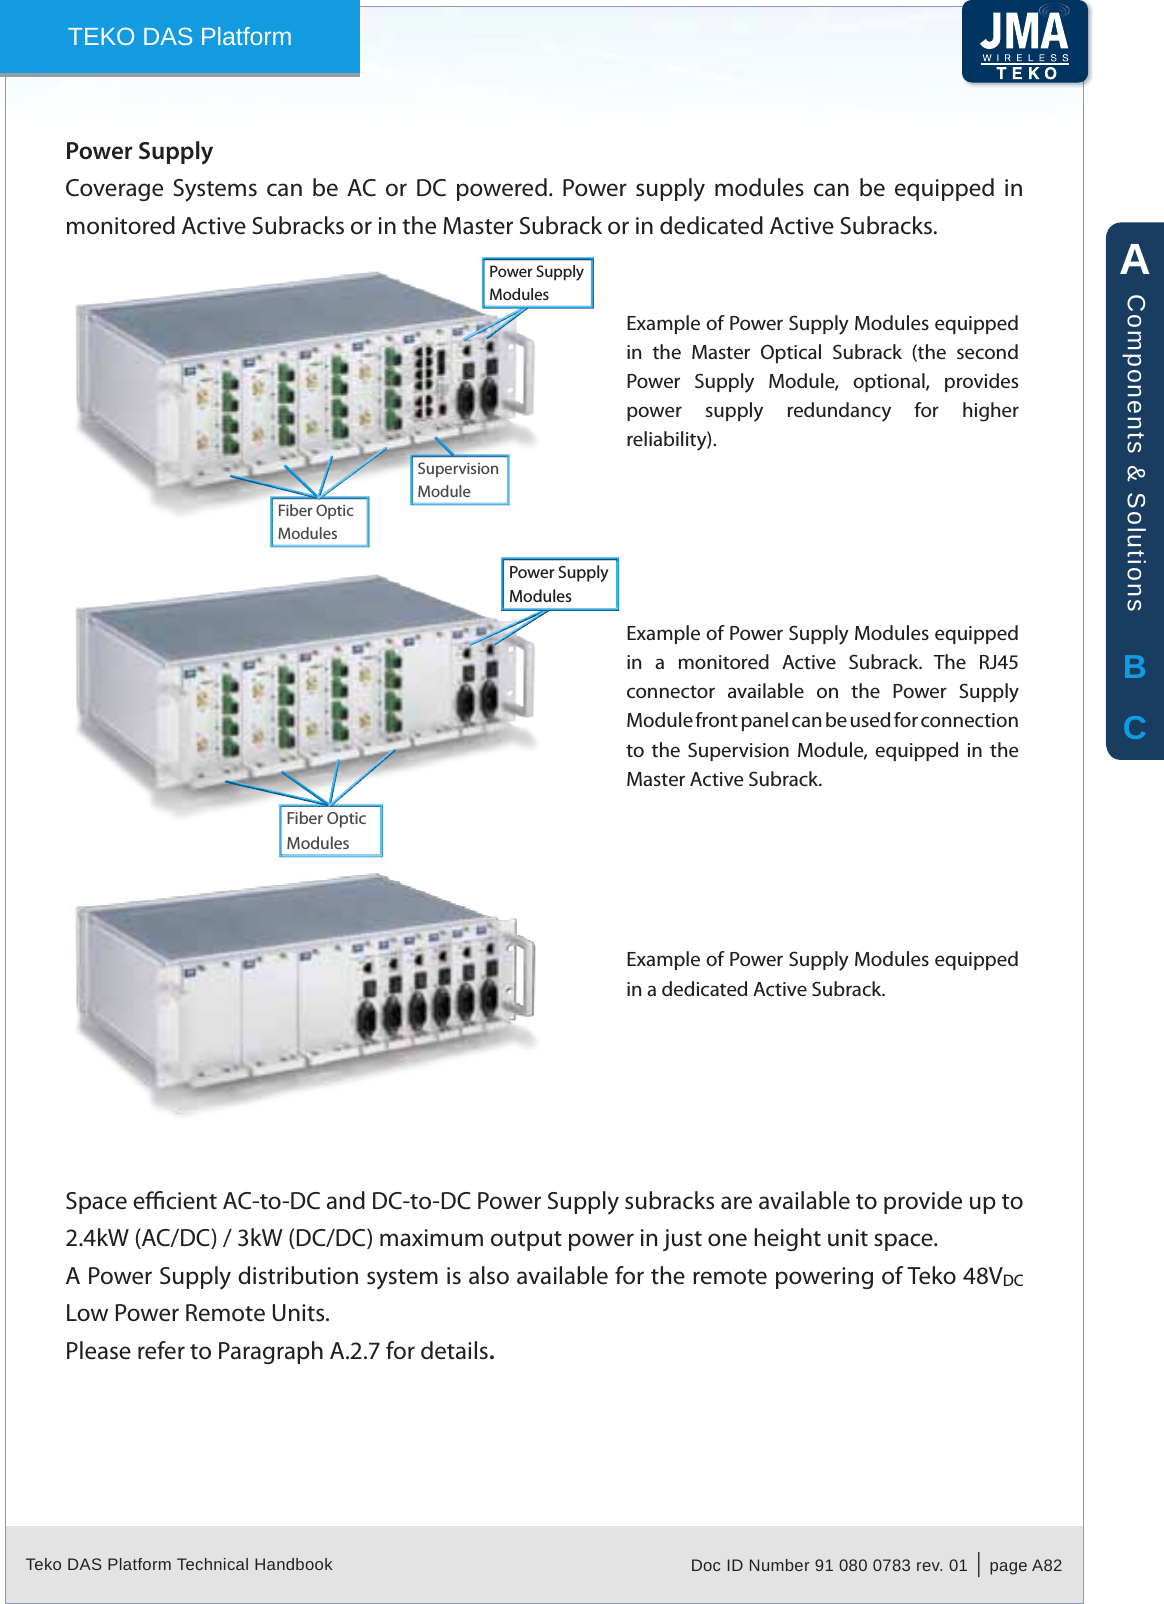 Teko DAS Platform Technical Handbook Doc ID Number 91 080 0783 rev. 01  |  page A82TEKO DAS PlatformPower SupplyCoverage  Systems can  be  AC  or  DC  powered.  Power  supply  modules  can  be  equipped  in monitored Active Subracks or in the Master Subrack or in dedicated Active Subracks.Example of Power Supply Modules equipped in  the  Master  Optical  Subrack  (the  second Power  Supply  Module,  optional,  provides power  supply  redundancy  for  higher reliability).Power Supply ModulesFiber OpticModulesSupervisionModulePower Supply ModulesFiber OpticModulesExample of Power Supply Modules equipped in  a  monitored  Active  Subrack.  The  RJ45 connector  available  on  the  Power  Supply Module front panel can be used for connection to  the  Supervision  Module,  equipped  in  the Master Active Subrack.Example of Power Supply Modules equipped in a dedicated Active Subrack.Space ecient AC-to-DC and DC-to-DC Power Supply subracks are available to provide up to 2.4kW (AC/DC) / 3kW (DC/DC) maximum output power in just one height unit space.A Power Supply distribution system is also available for the remote powering of Teko 48VDC Low Power Remote Units.Please refer to Paragraph A.2.7 for details.ABCComponents &amp; Solutions